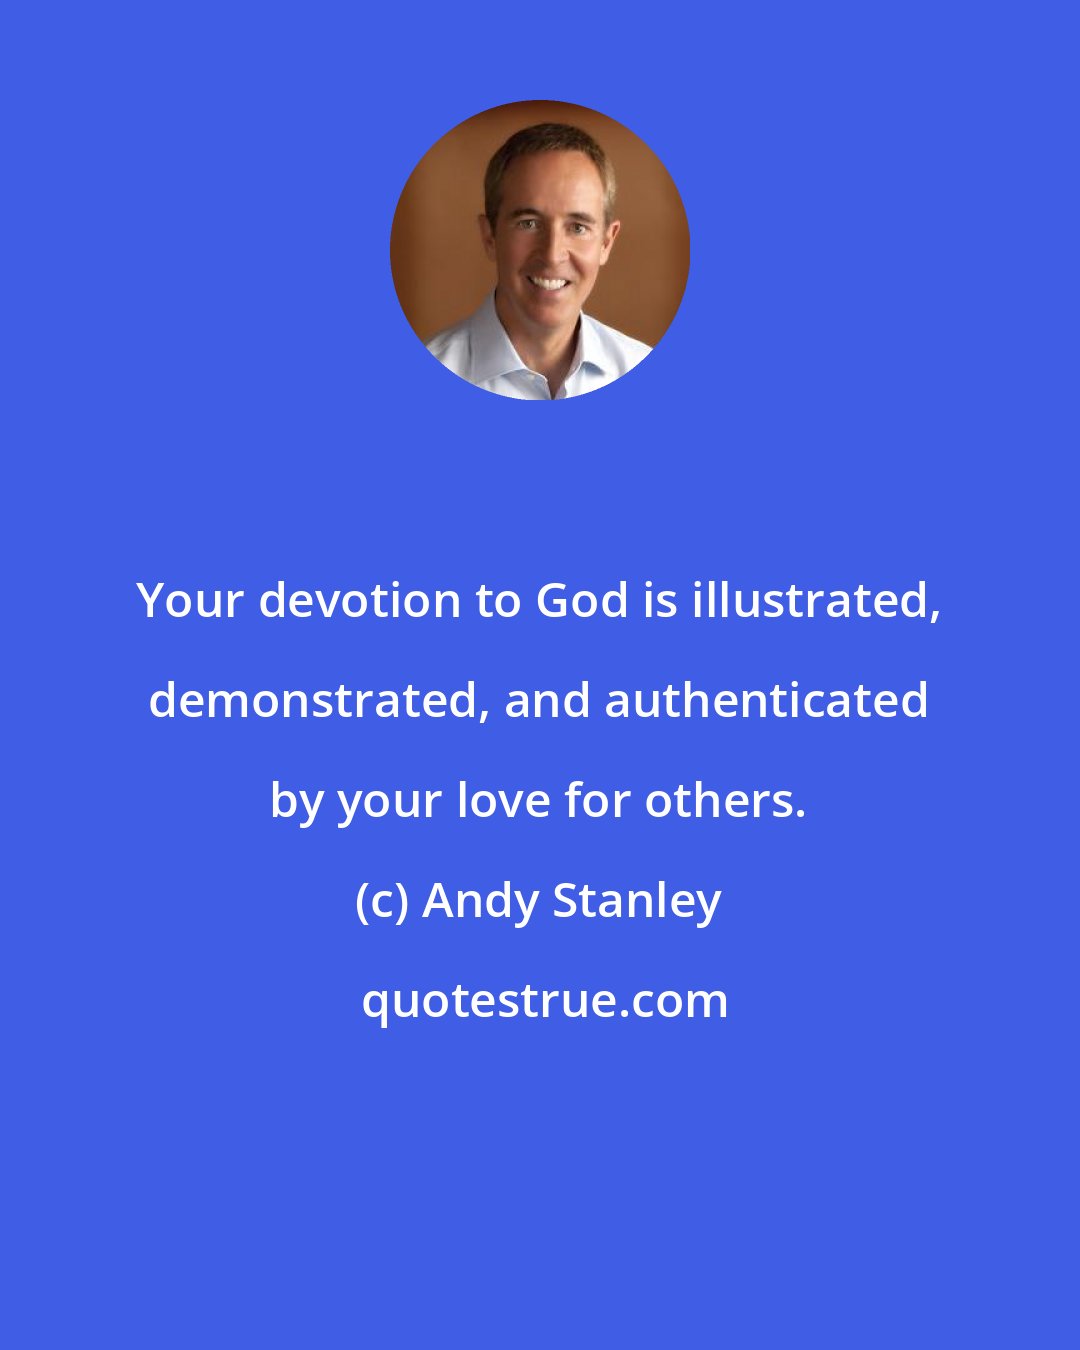 Andy Stanley: Your devotion to God is illustrated, demonstrated, and authenticated by your love for others.